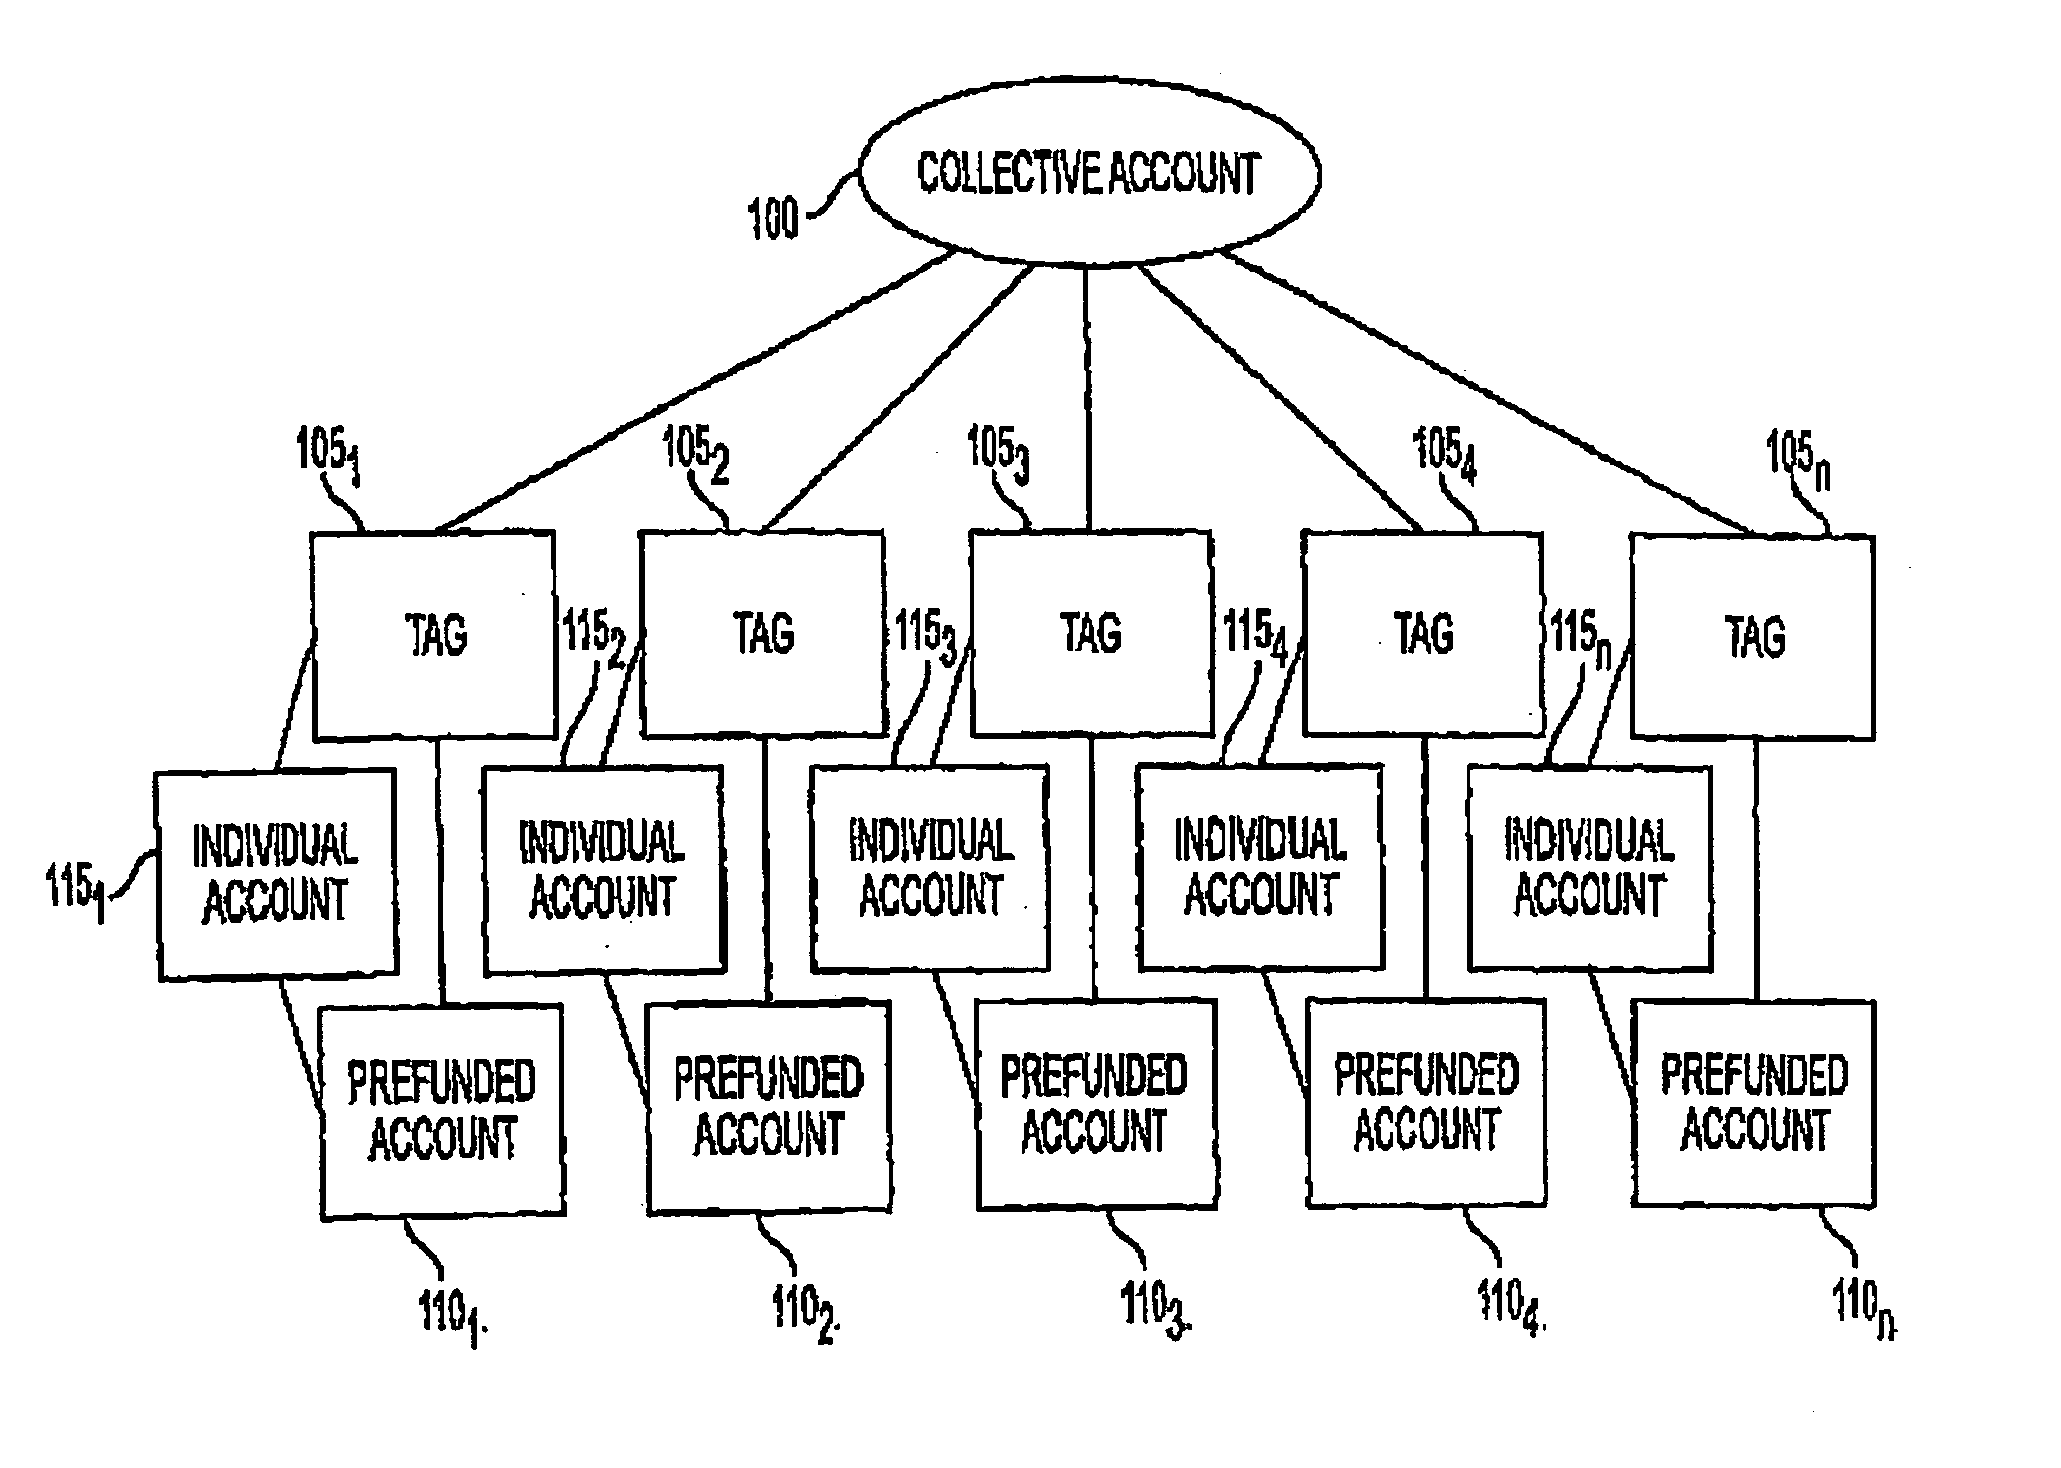 System and method for funding a collective account by use of an electronic tag